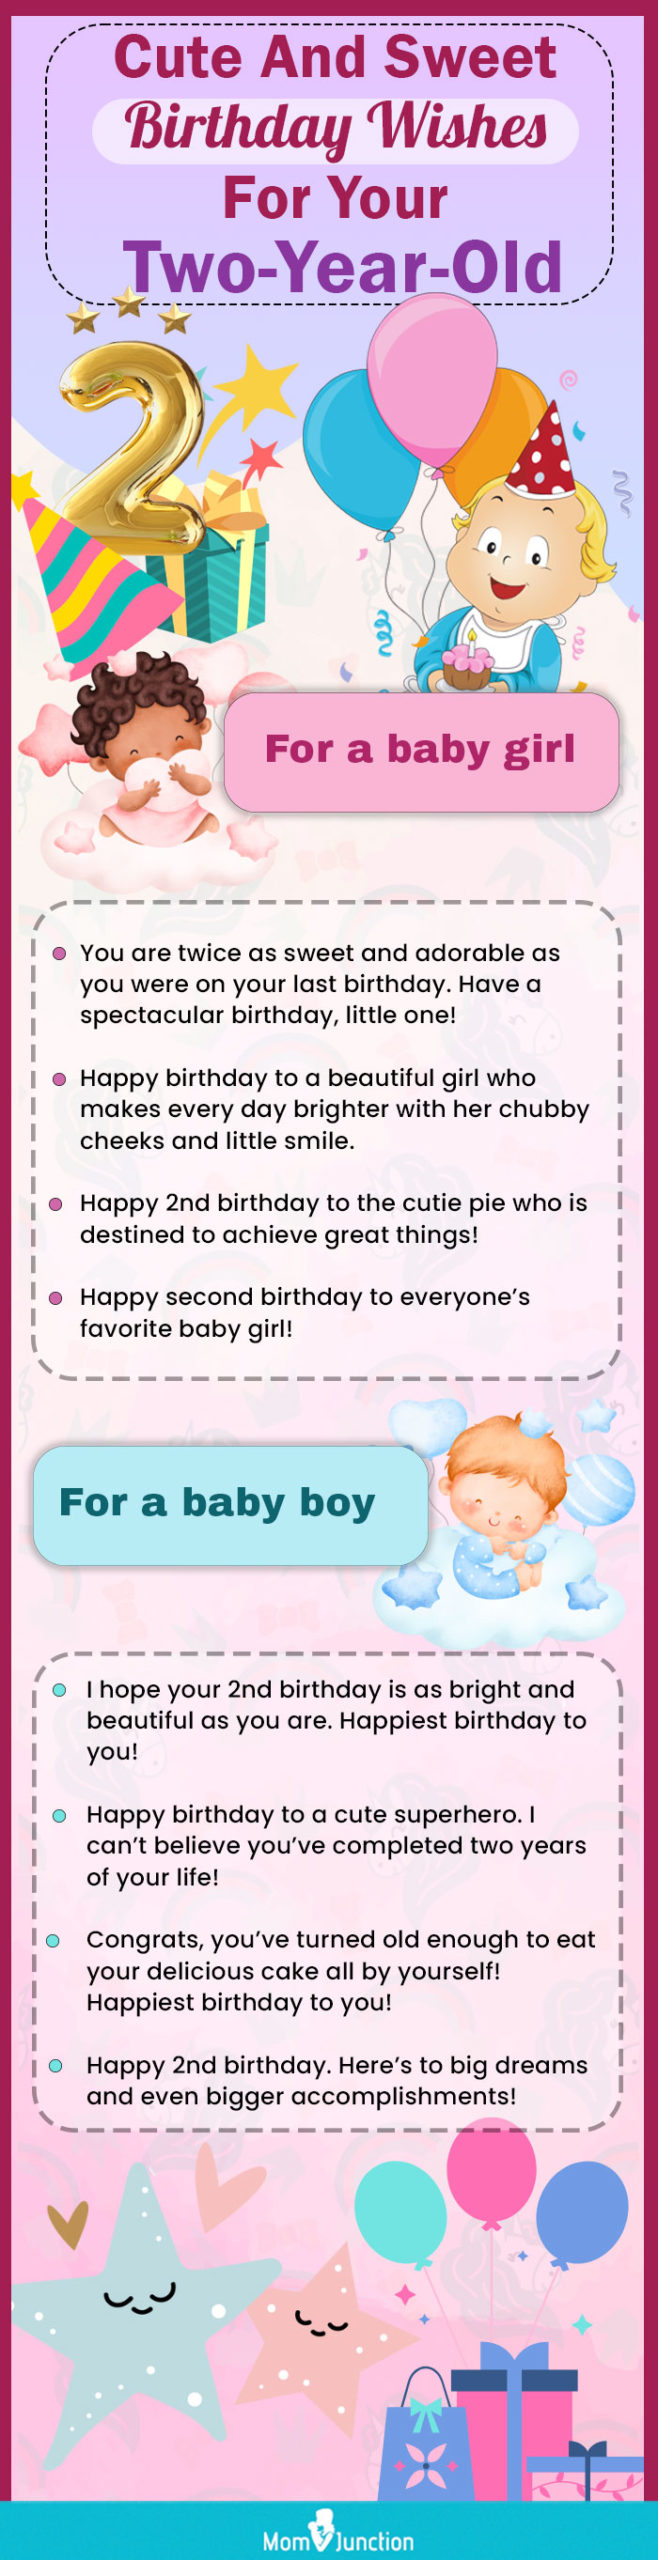 cute and sweet birthday wishes for your two year old (infographic)